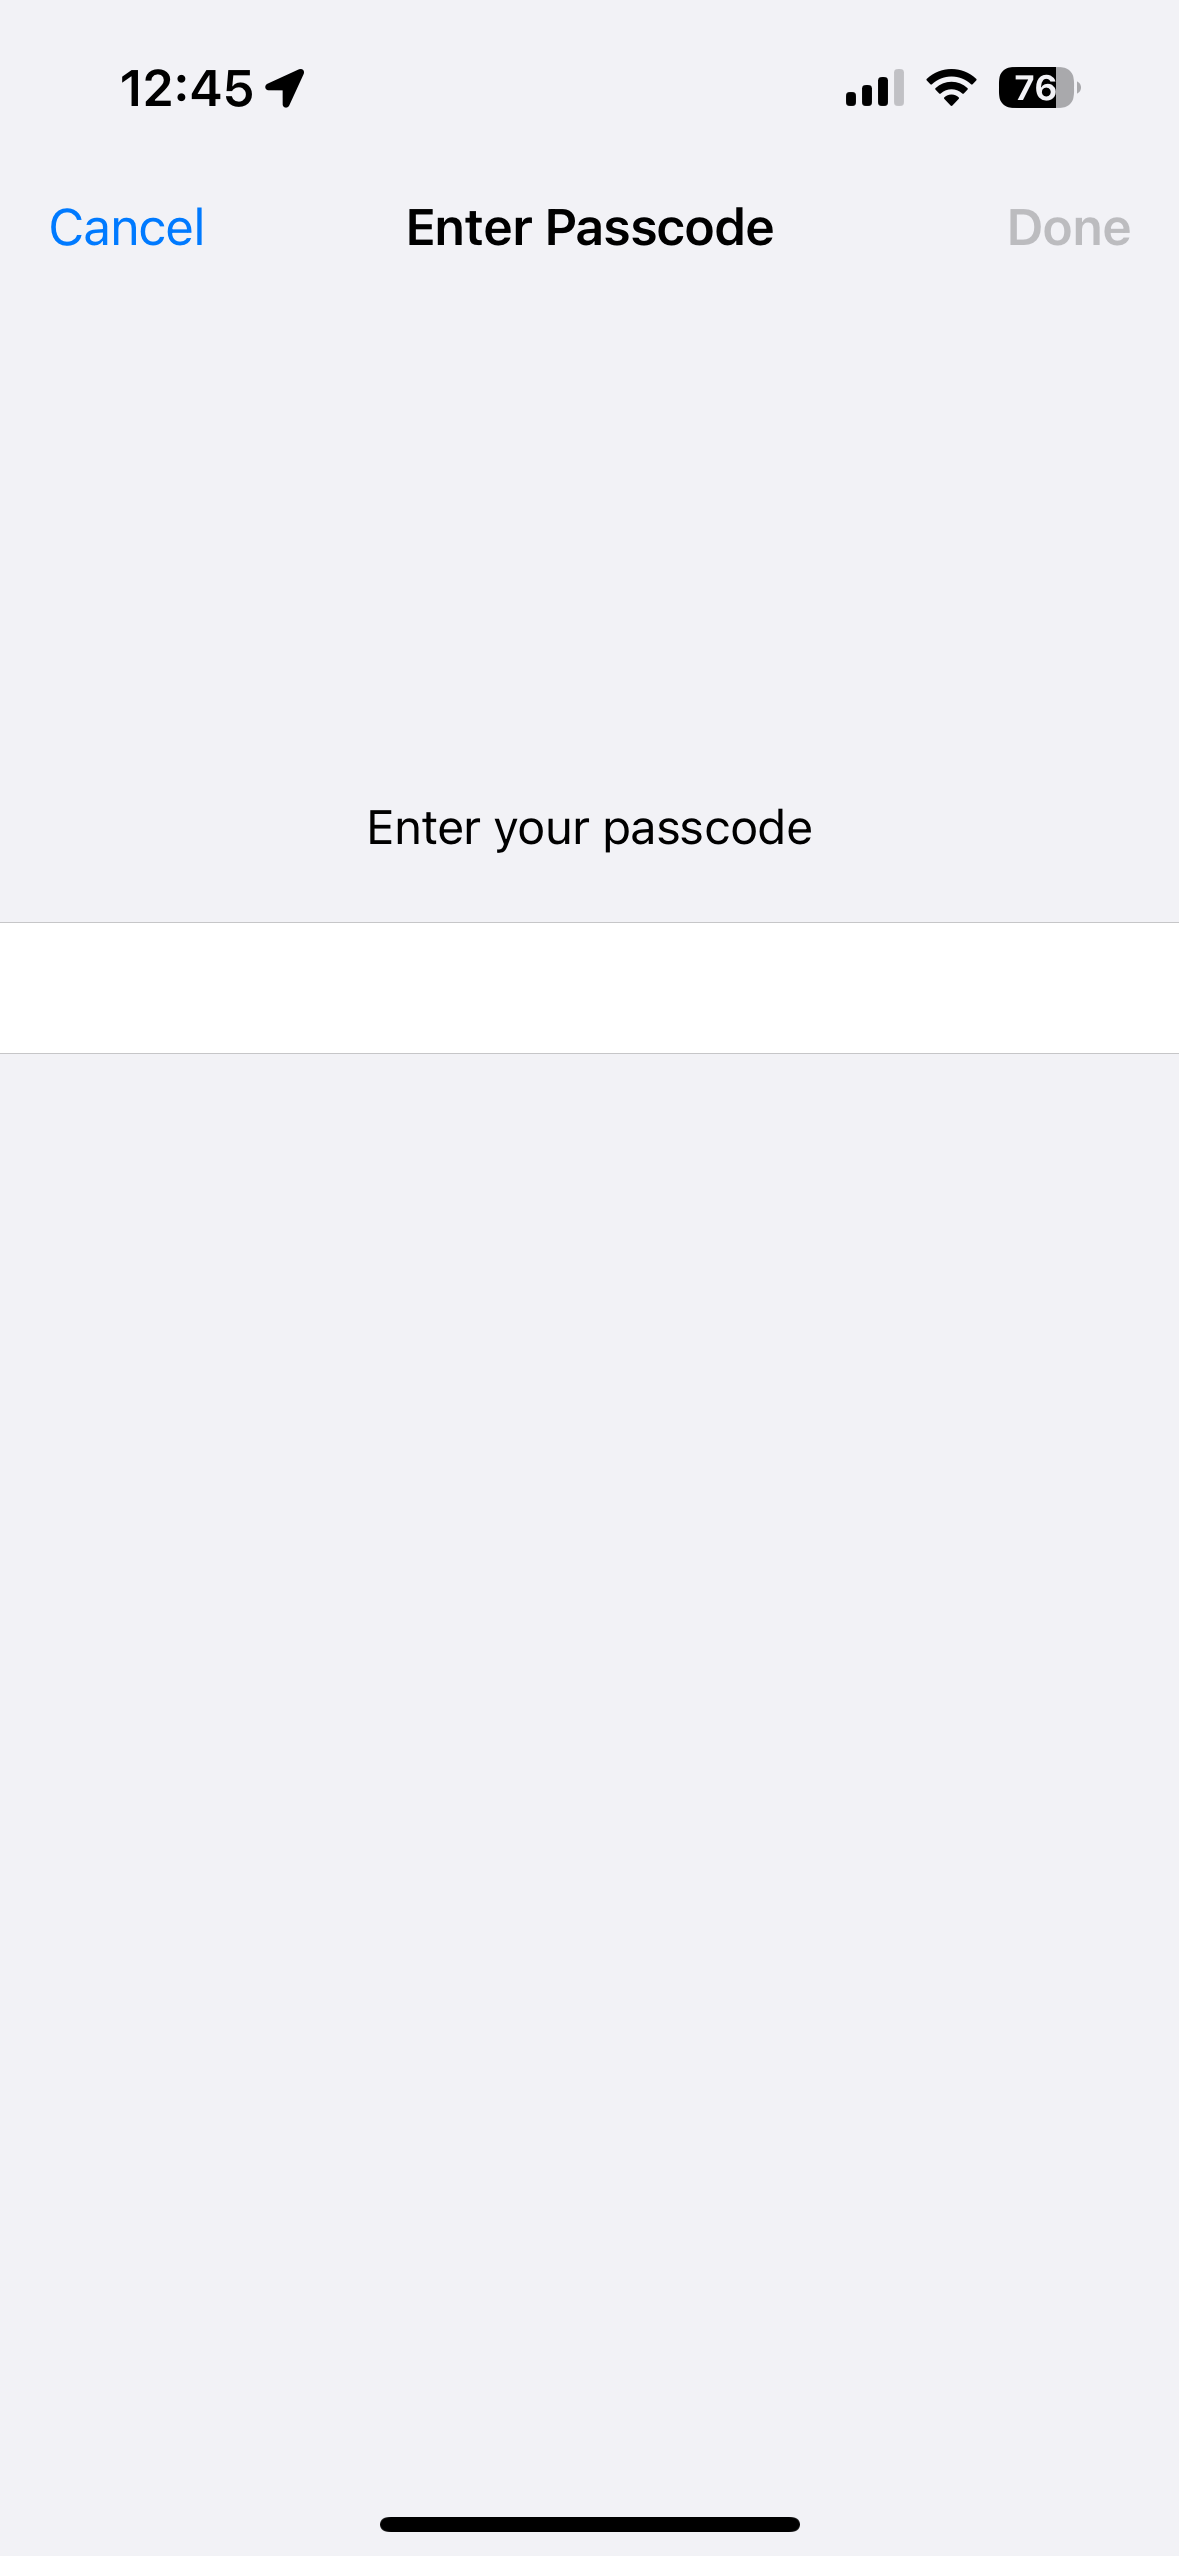 Enter your passcode screen on iPhone